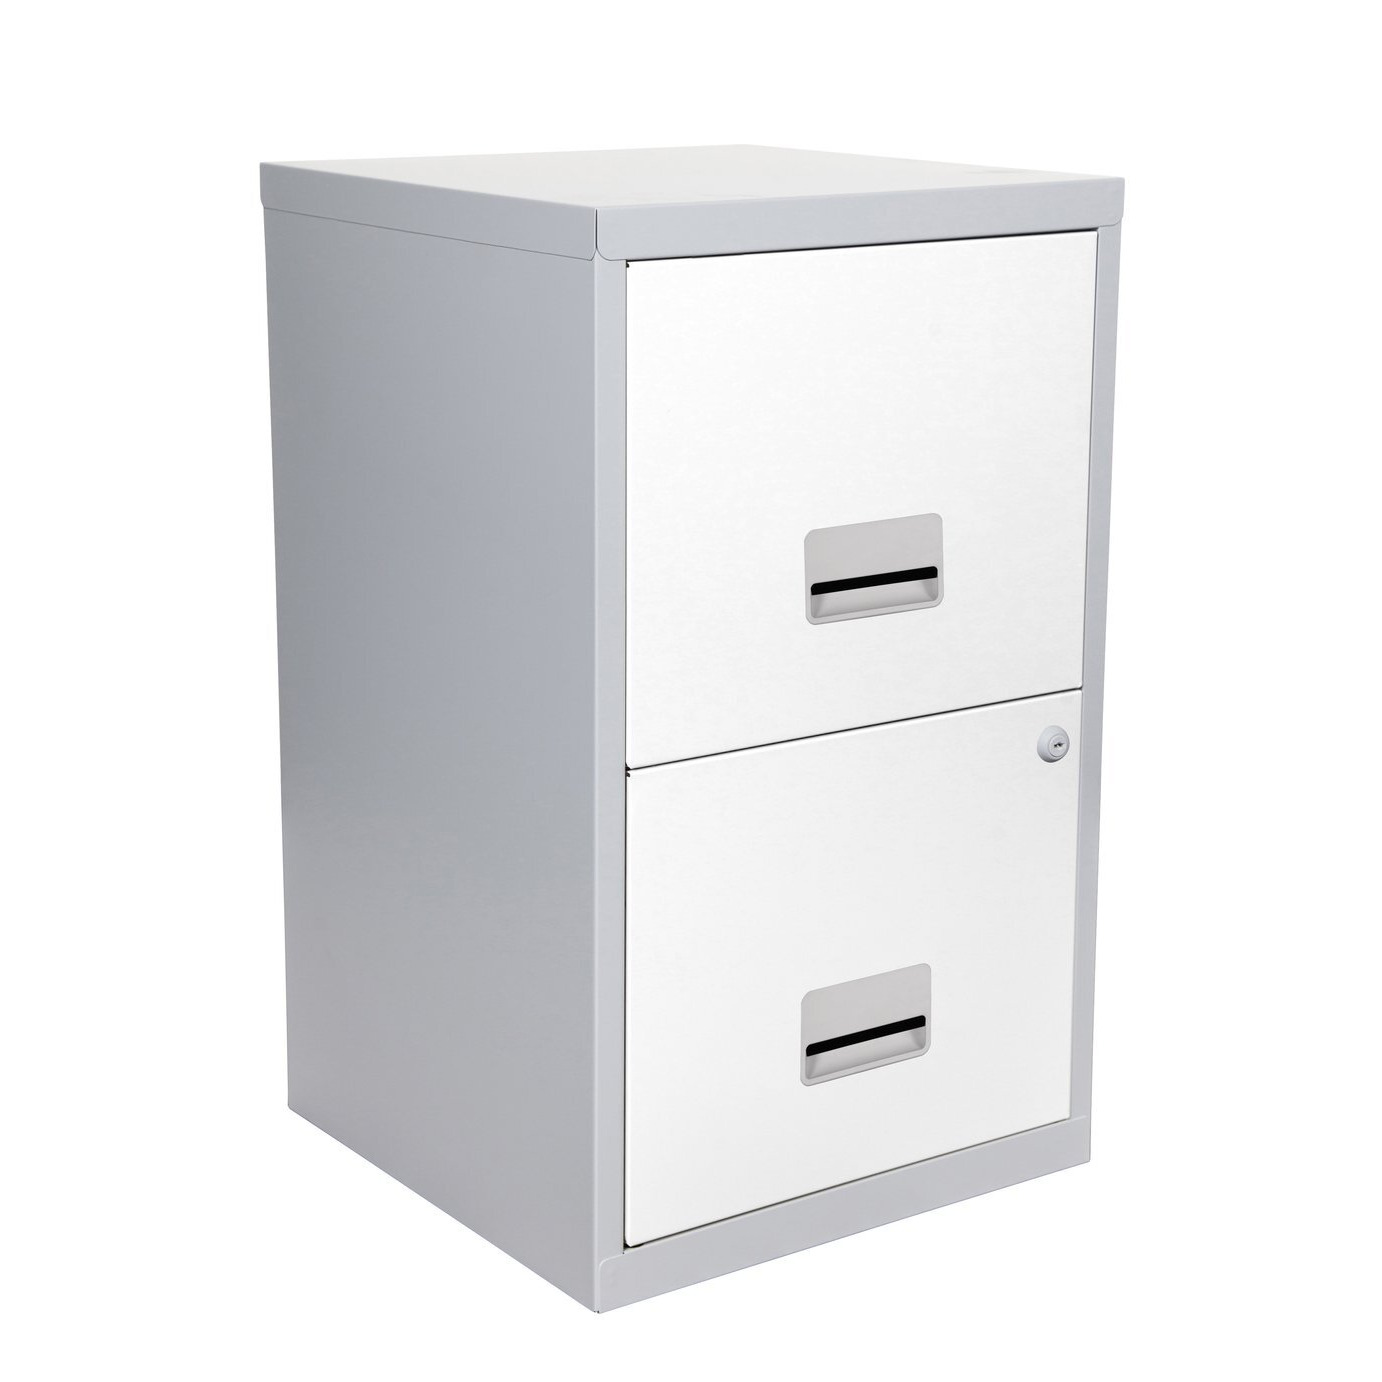 Pierre Henry 2 Drawer Metal Filing Cabinet - Silver & White - image 1